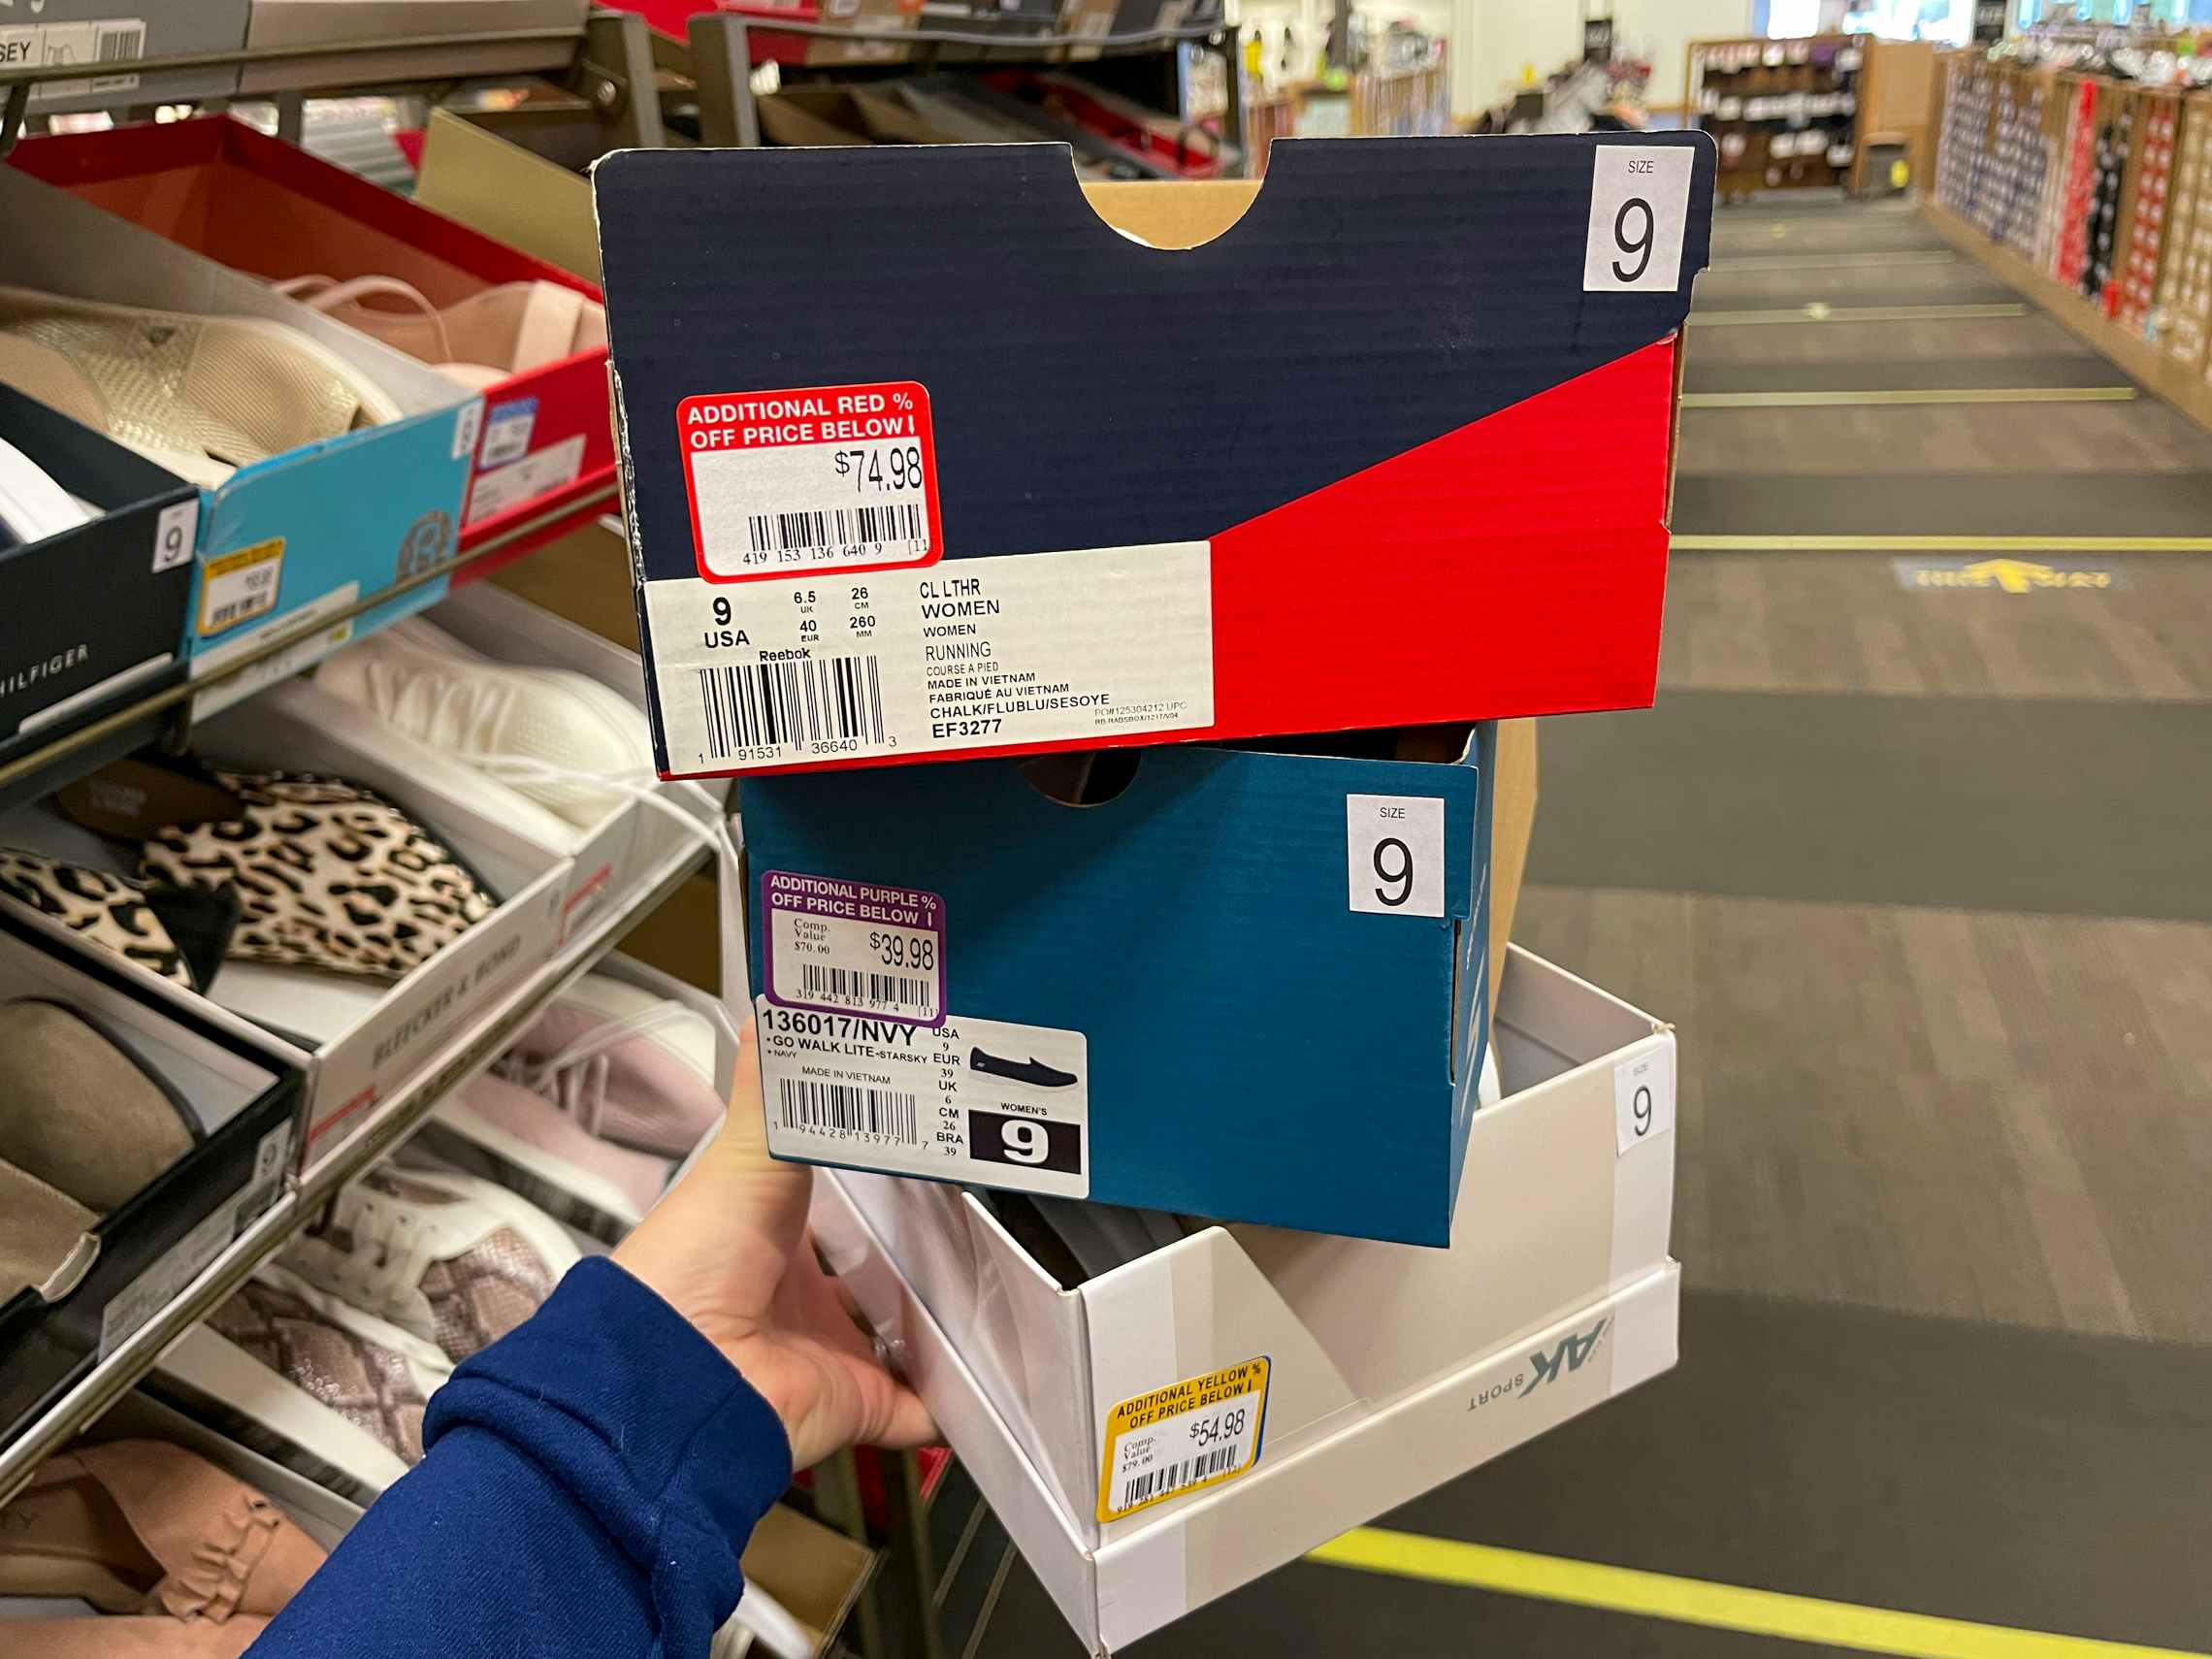 A stack of show boxes with red, purple, and yellow, clearance stickers on them.